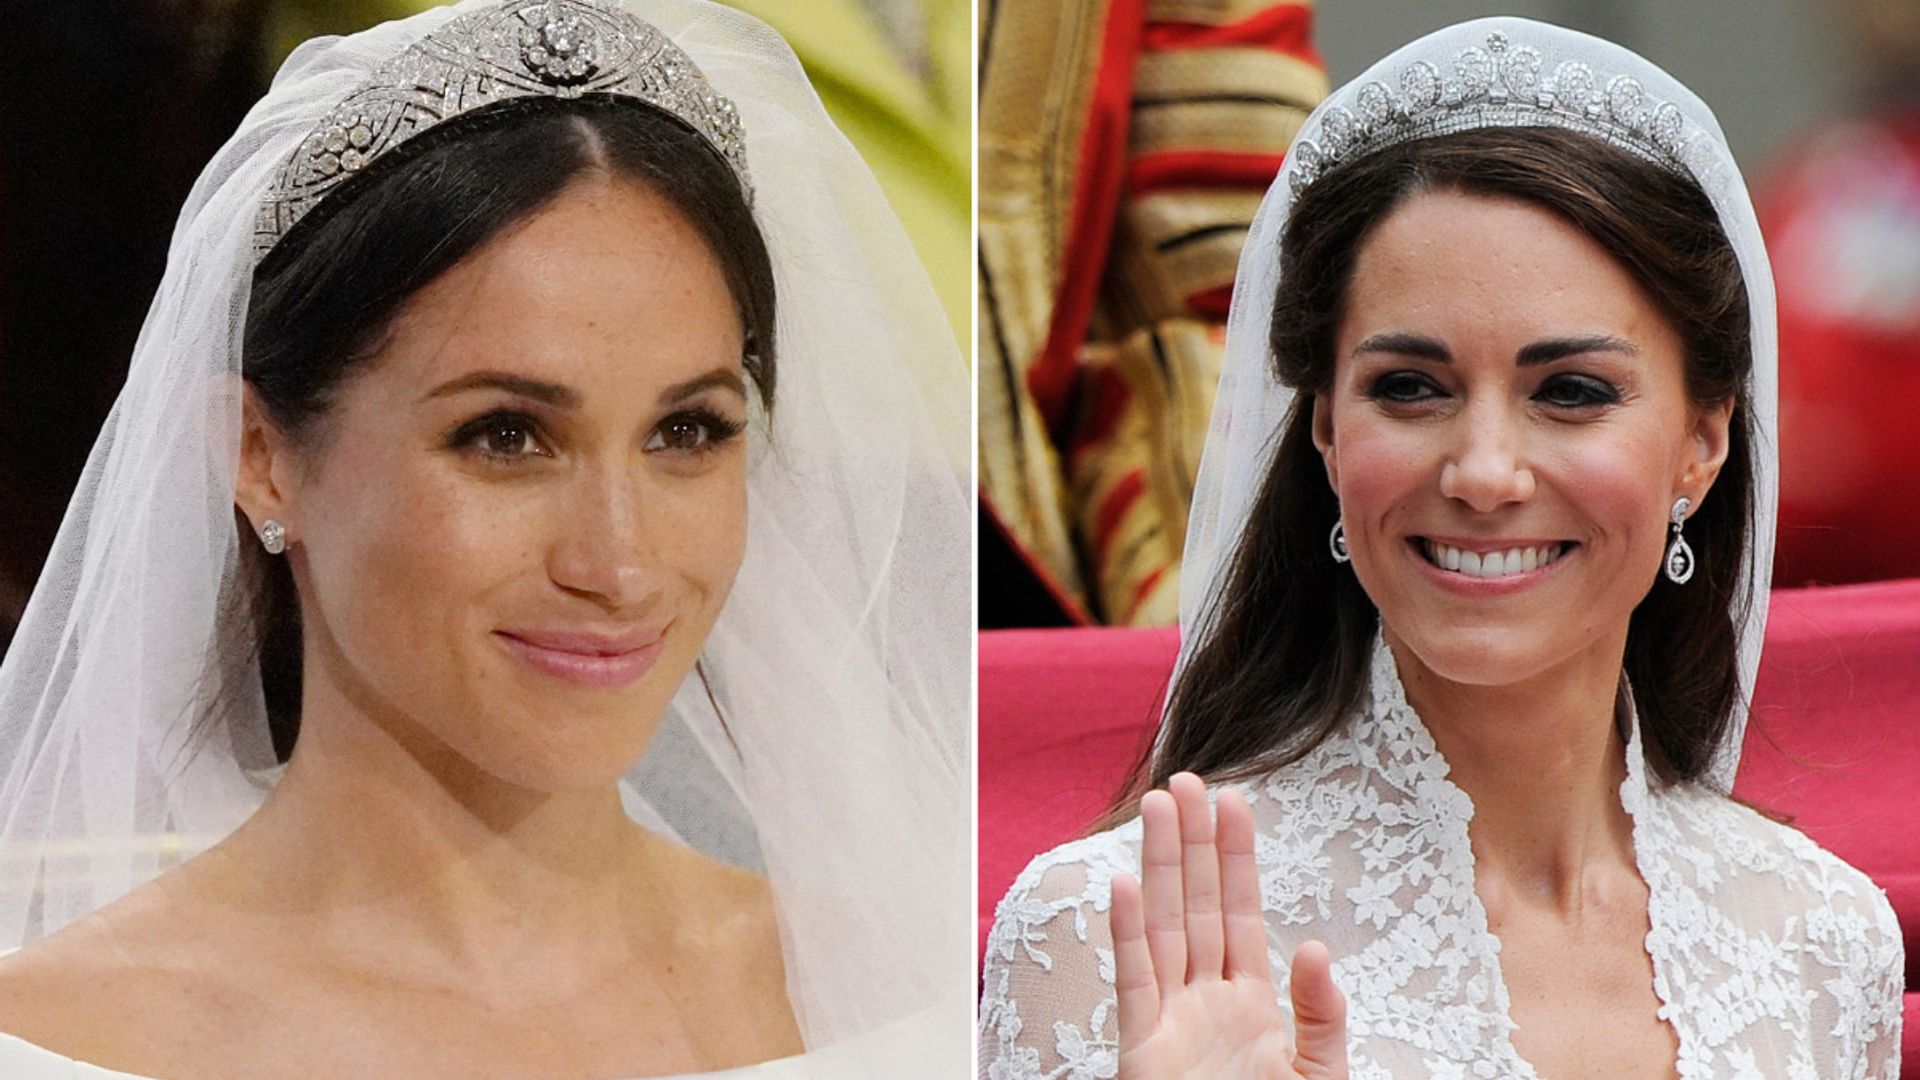 How Kate Middleton and Meghan Markle coordinated on their wedding days